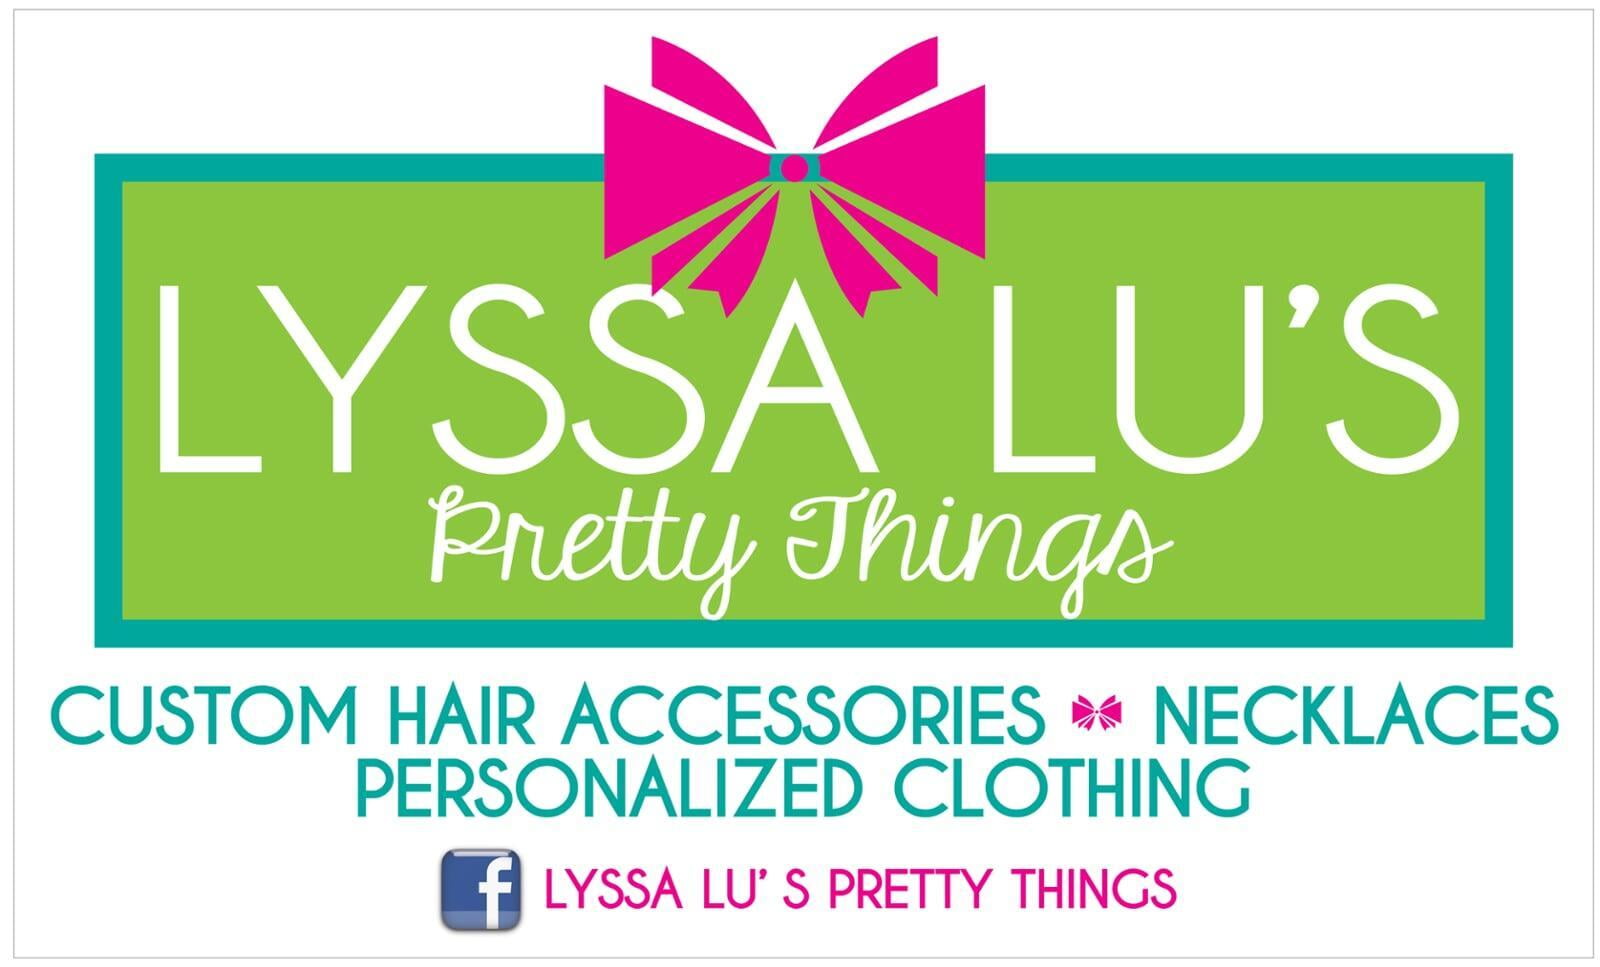 Lyssa Lu's Pretty Things Logo: Custom Hair Accessories, Necklaces, Personalized Clothing